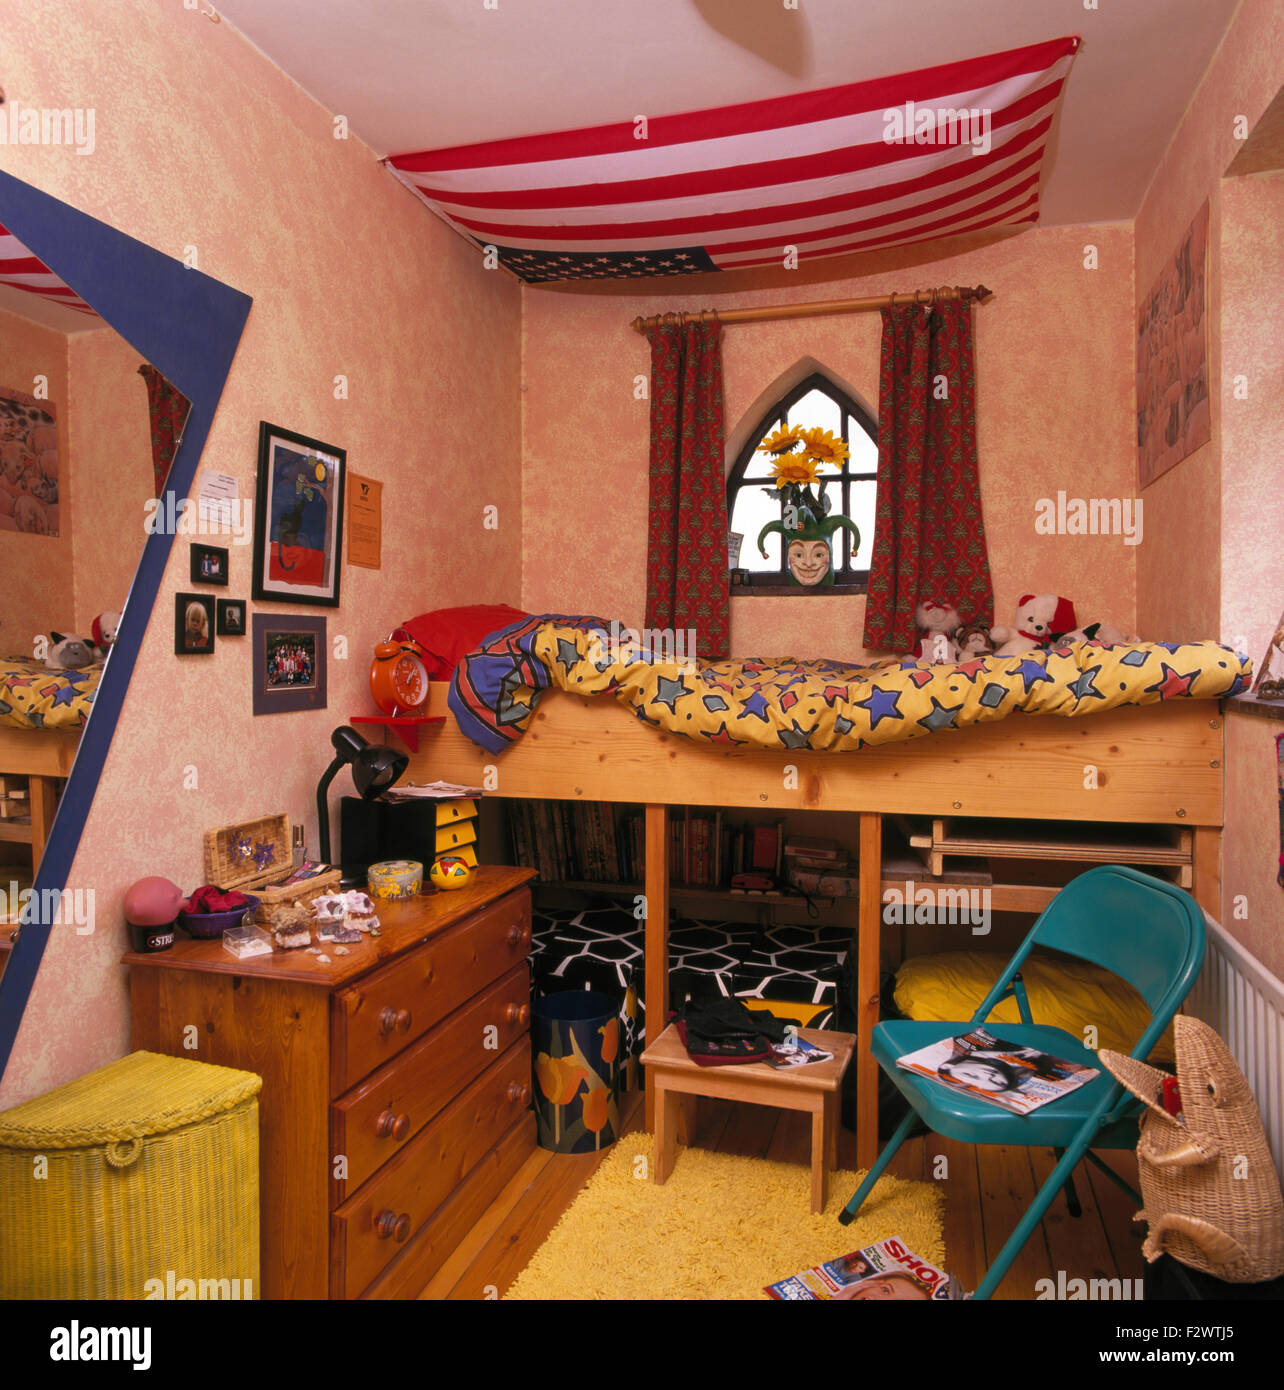 Red striped awning above simple bunk beds in child's nineties bedroomn Stock Photo